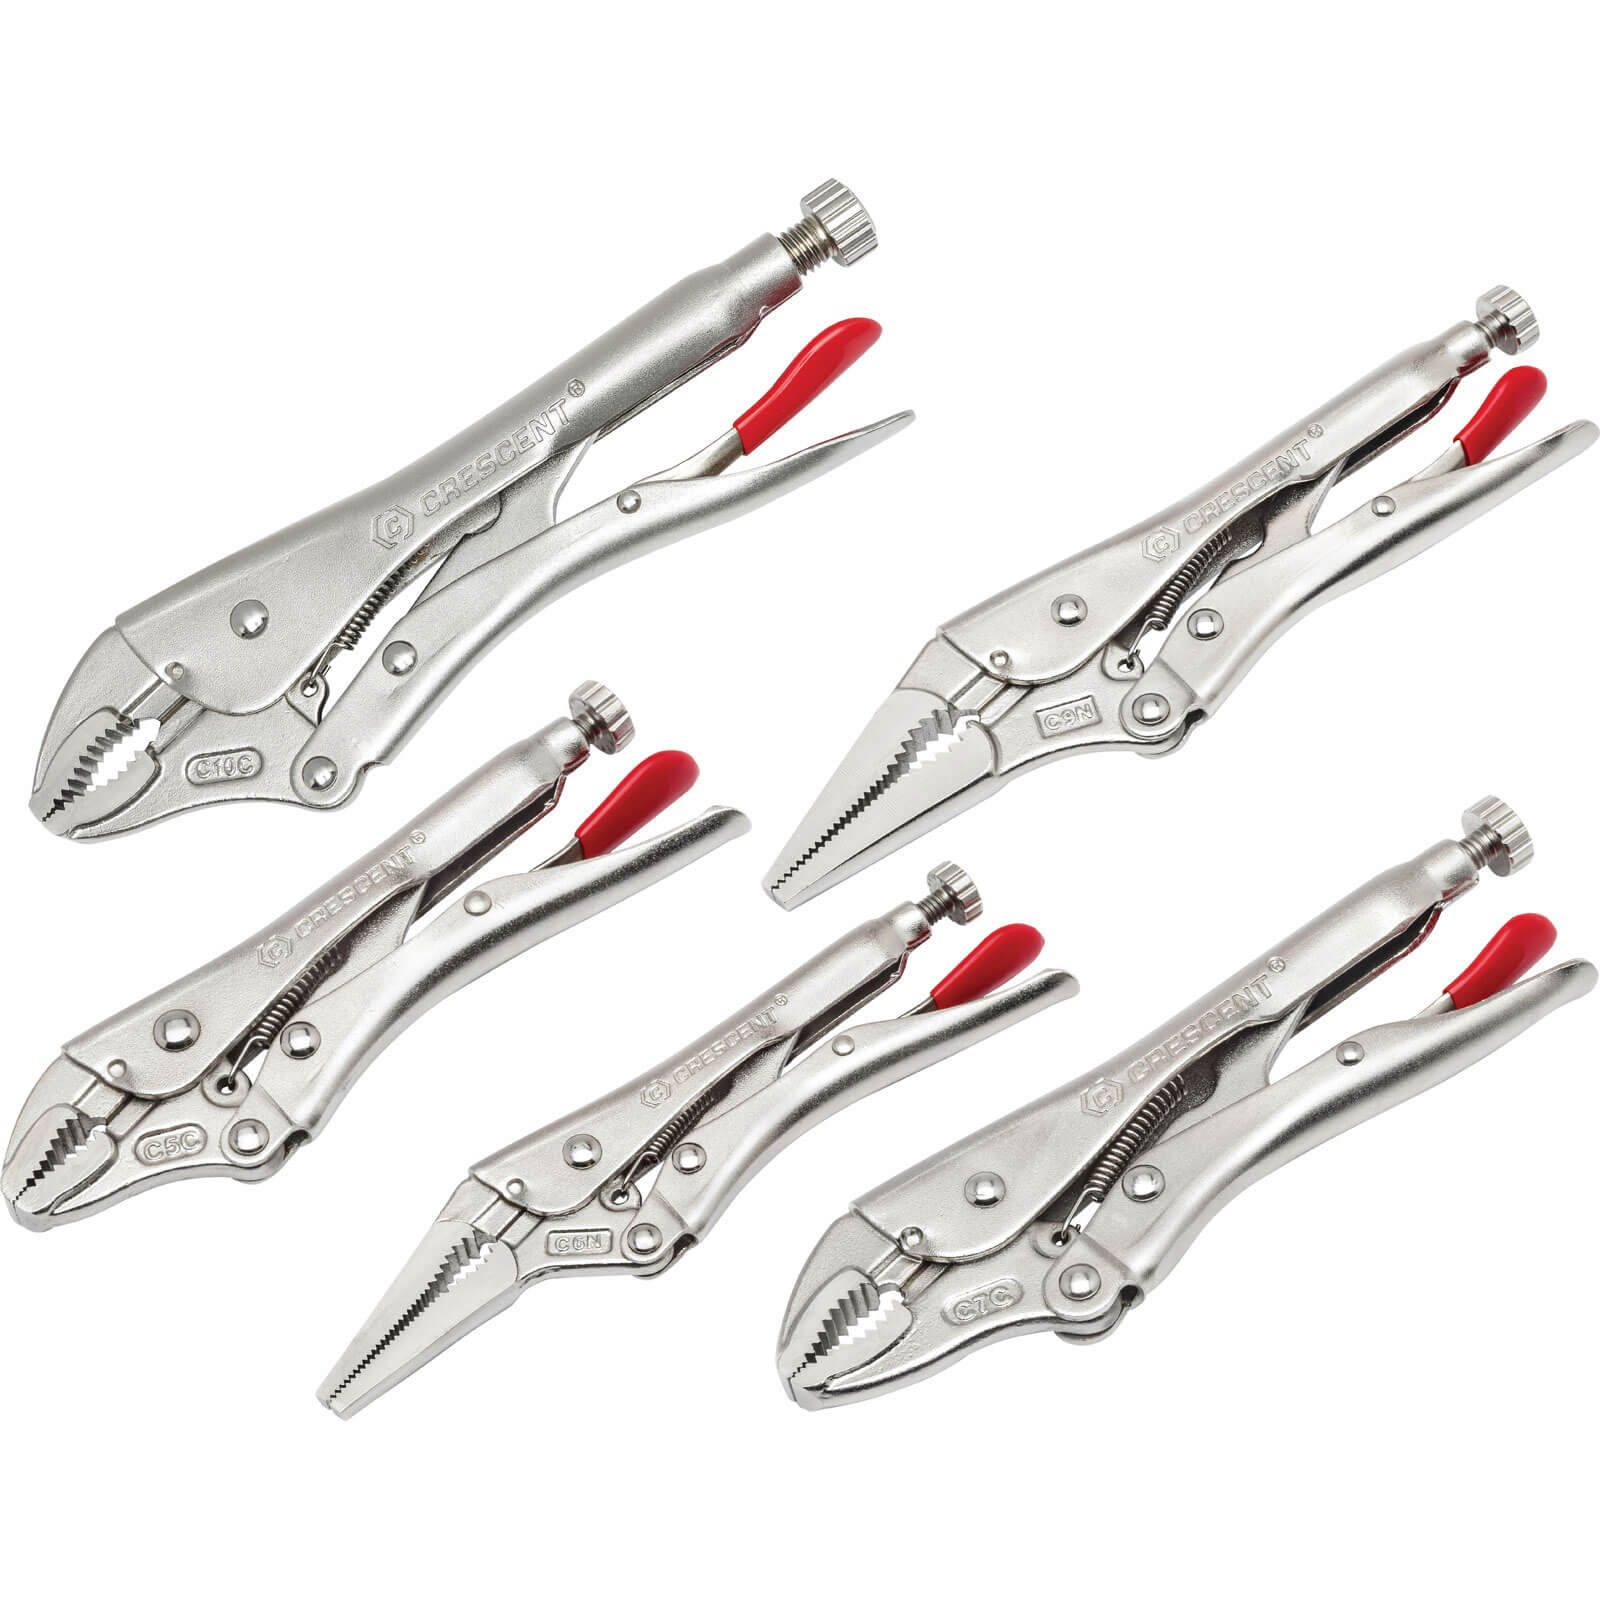 Crescent 5 Piece Locking Pliers With Wire Cutter Set